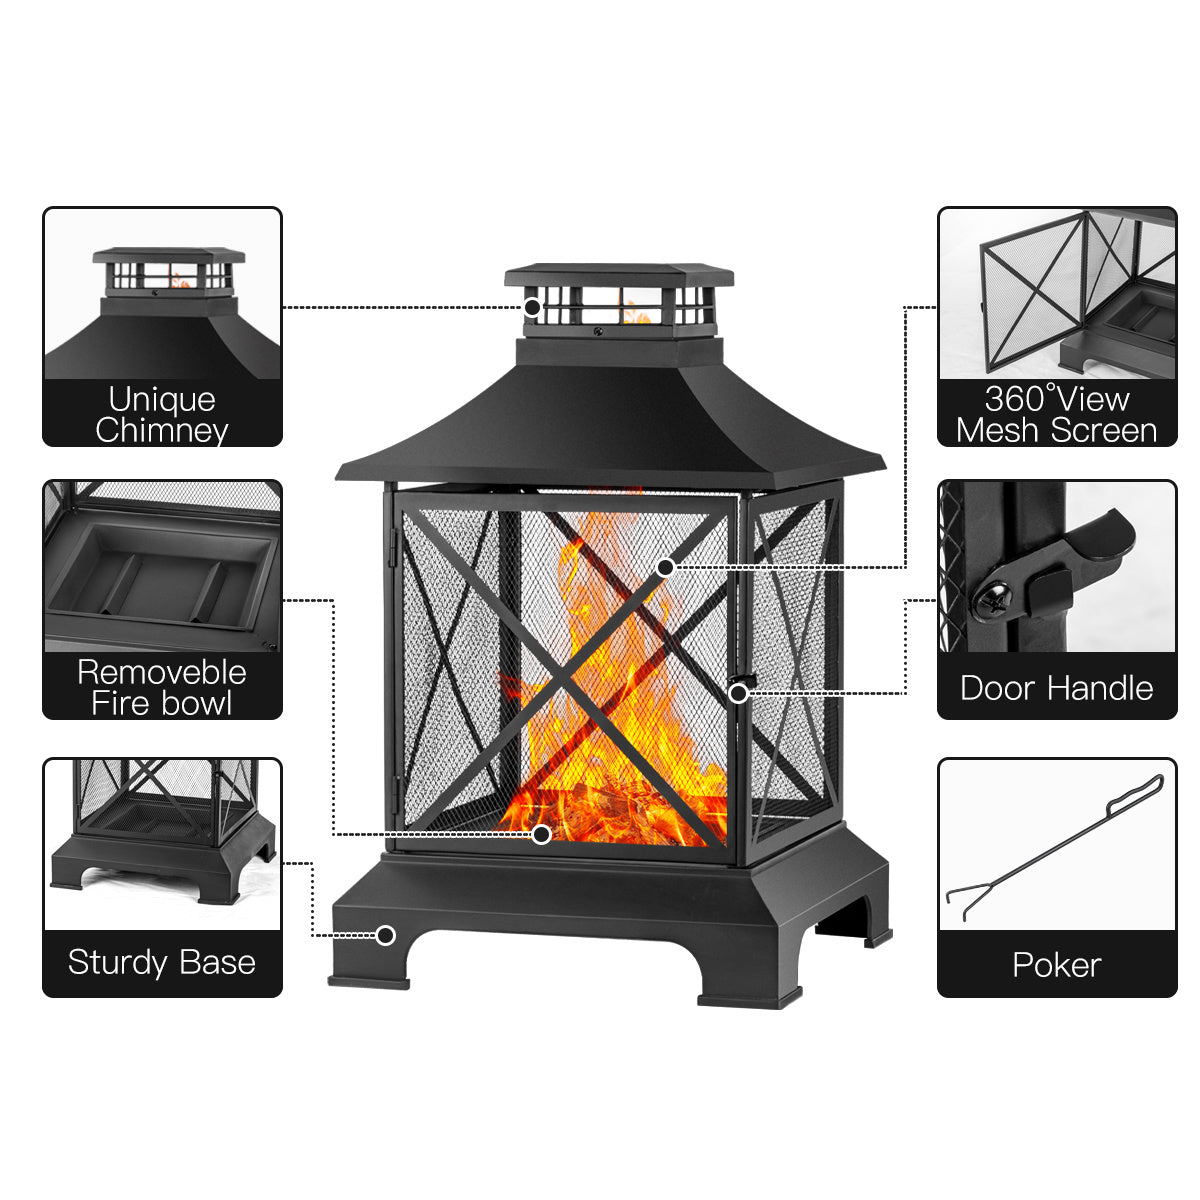 24" Pagoda-Style Steel Wood-Burning Fire Pit with Log Grate and Poker